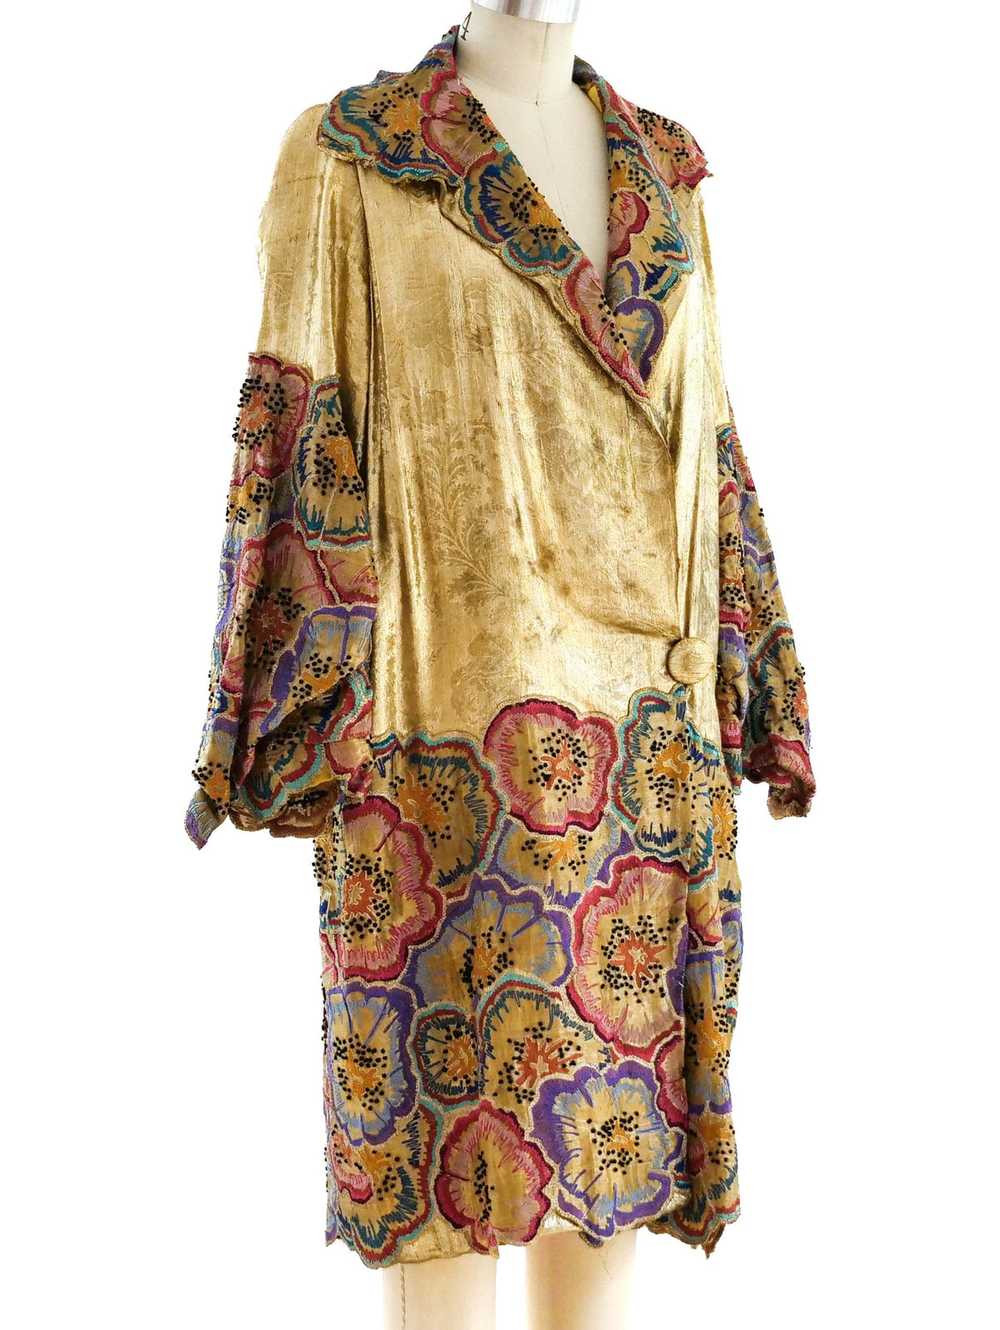 1920's Gold Lame Opera Coat with Floral Embroidery - image 2